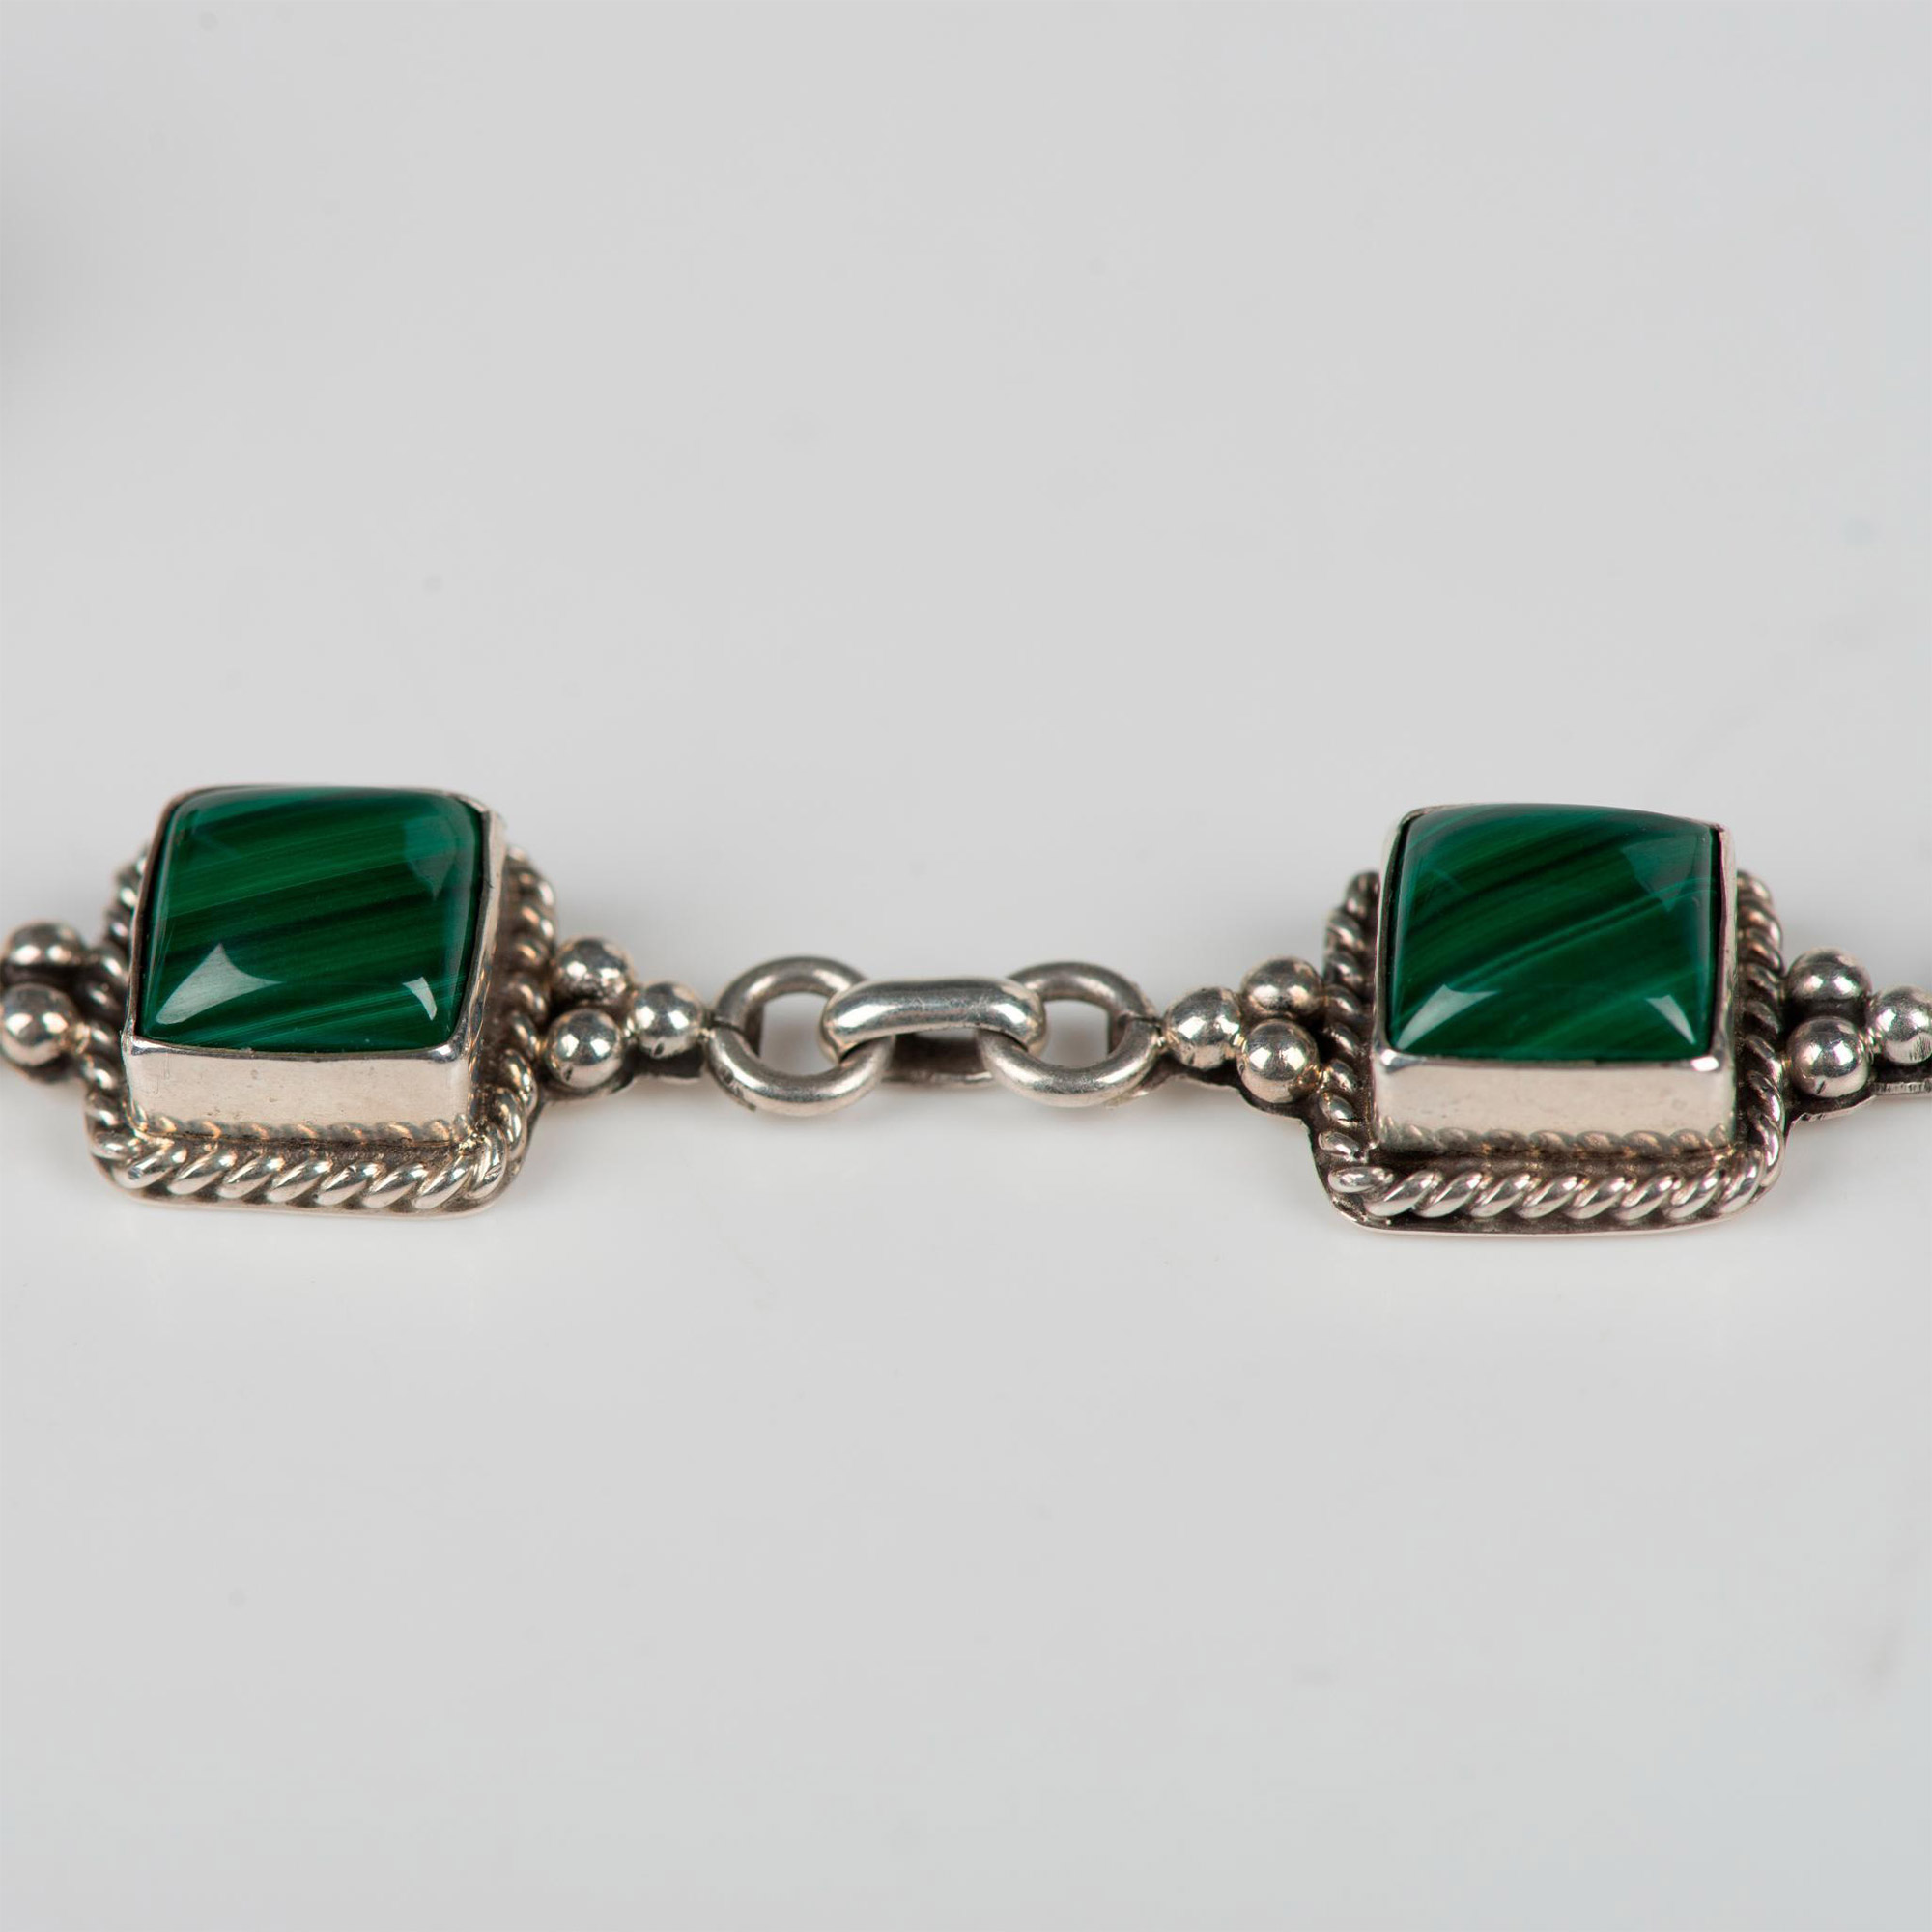 2pc Sterling Silver Malachite Clip-On Earrings and Bracelet - Image 2 of 6